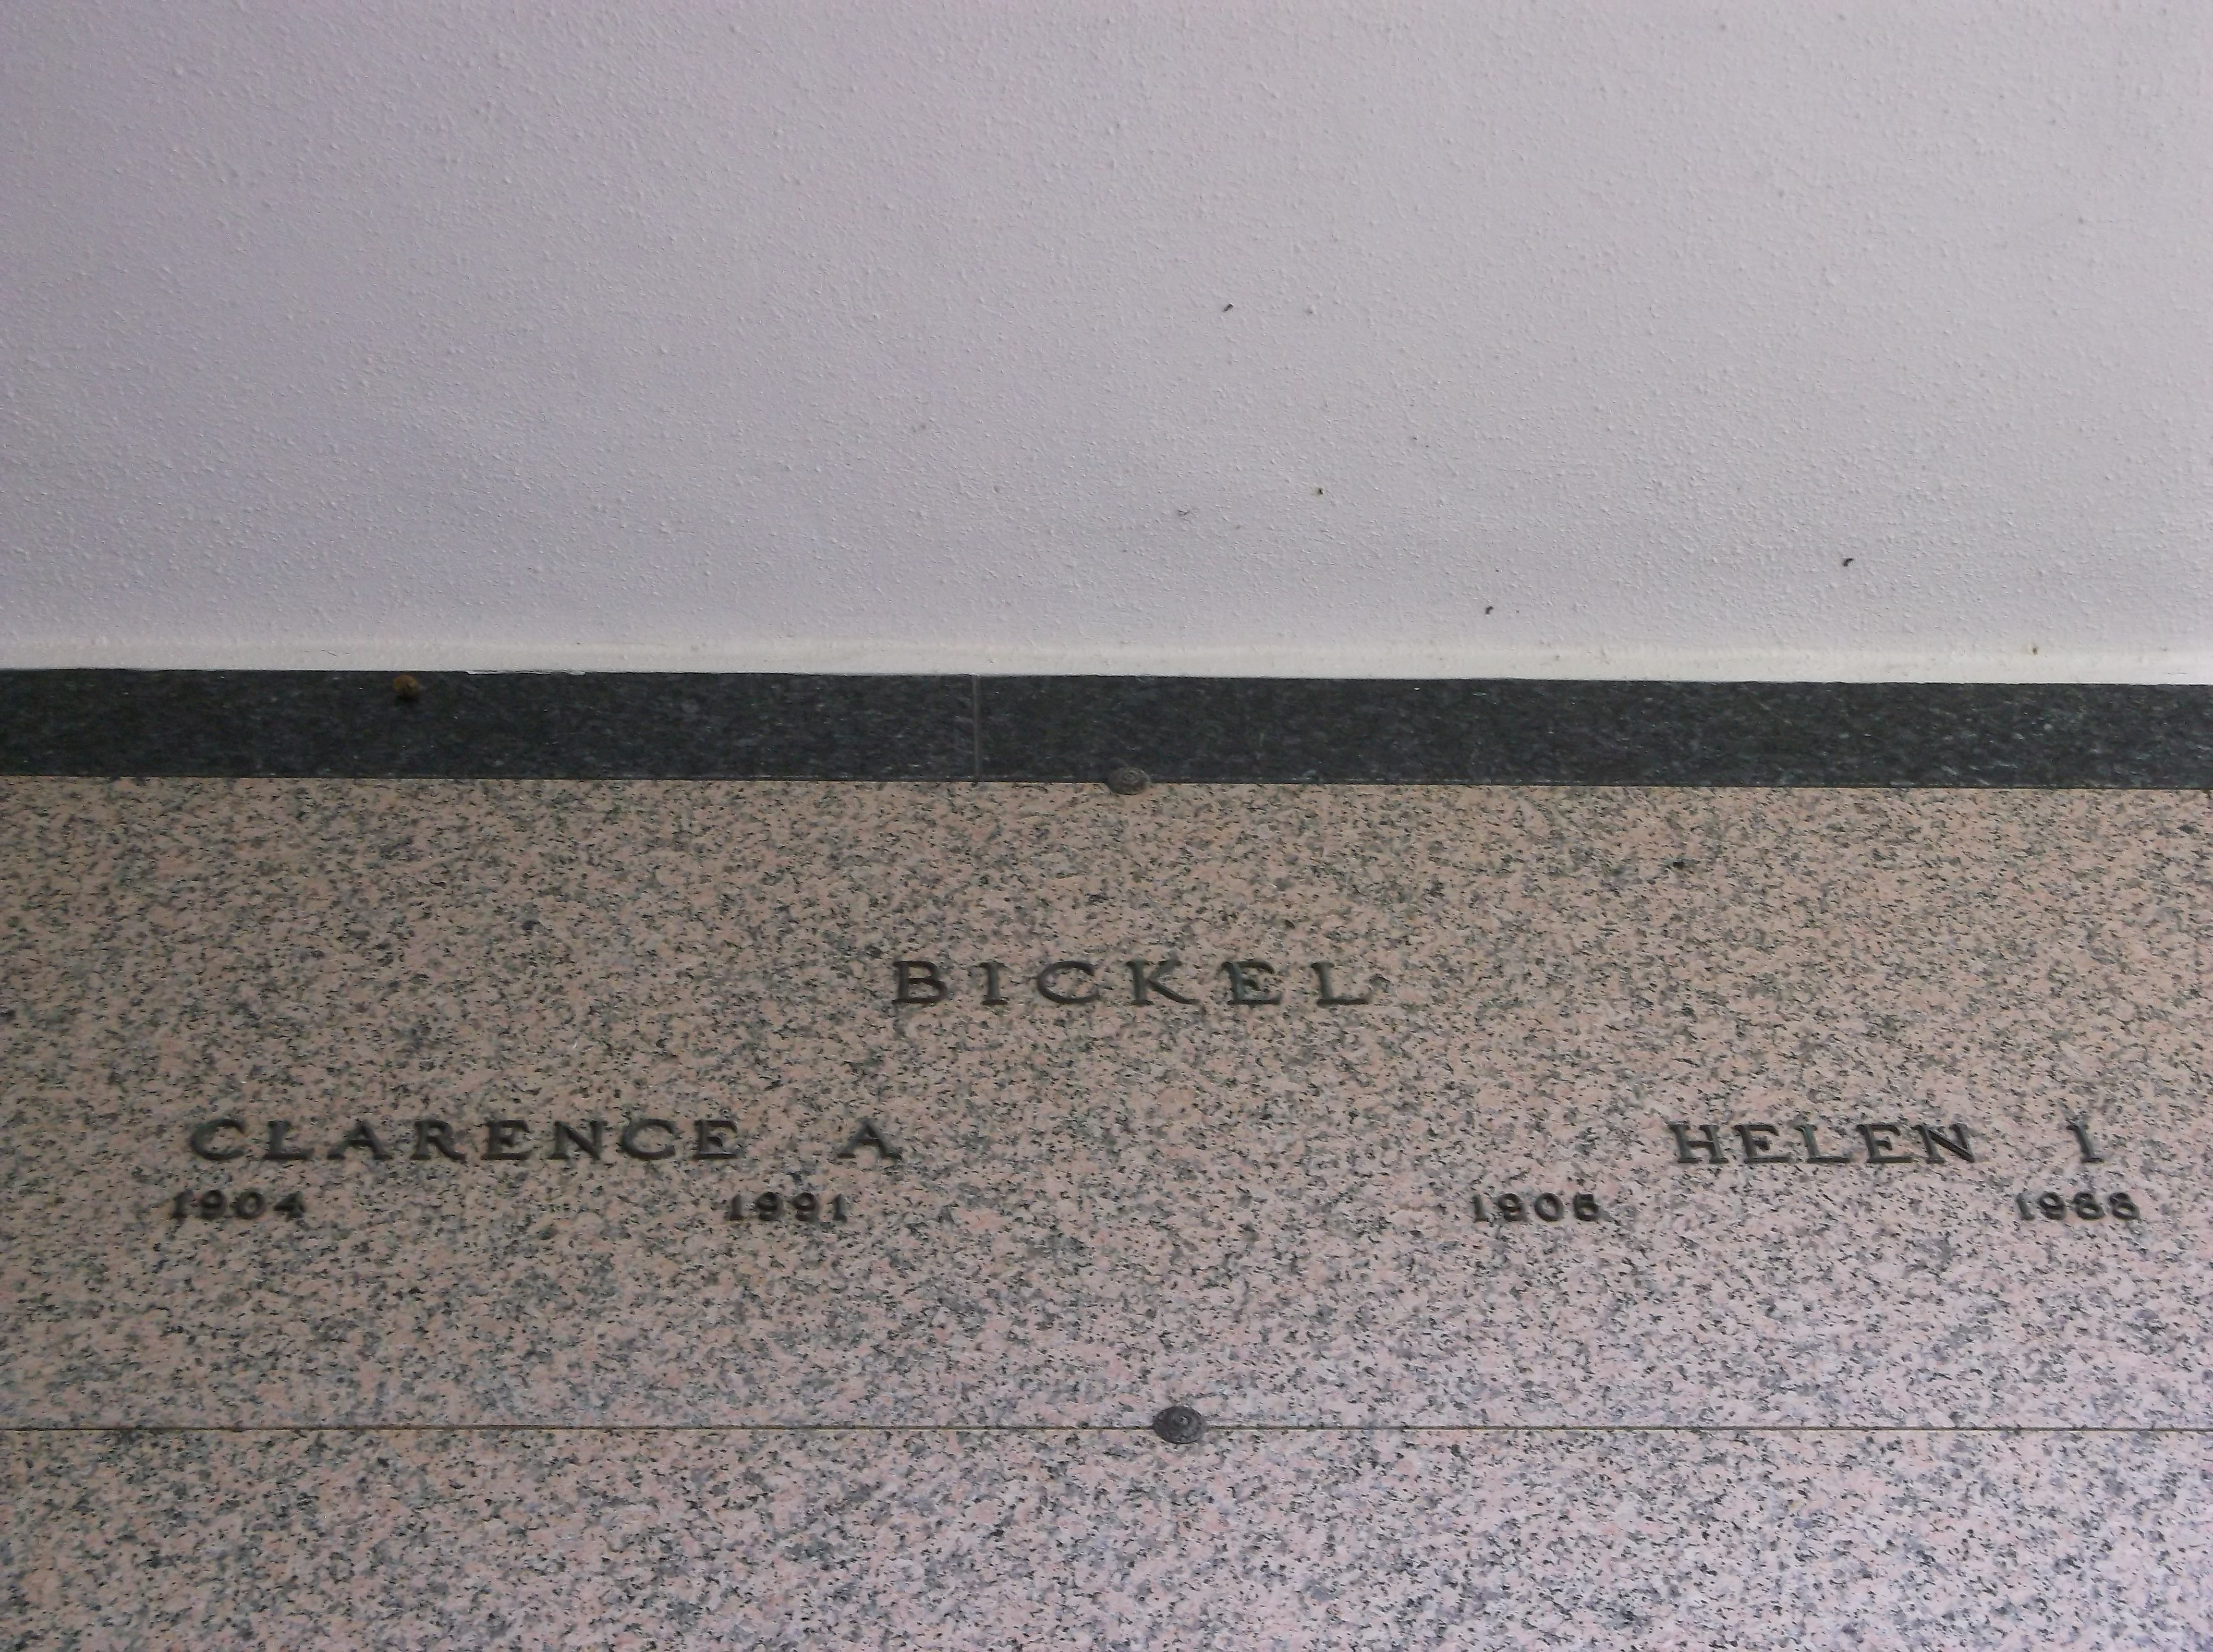 Clarence A Bickel